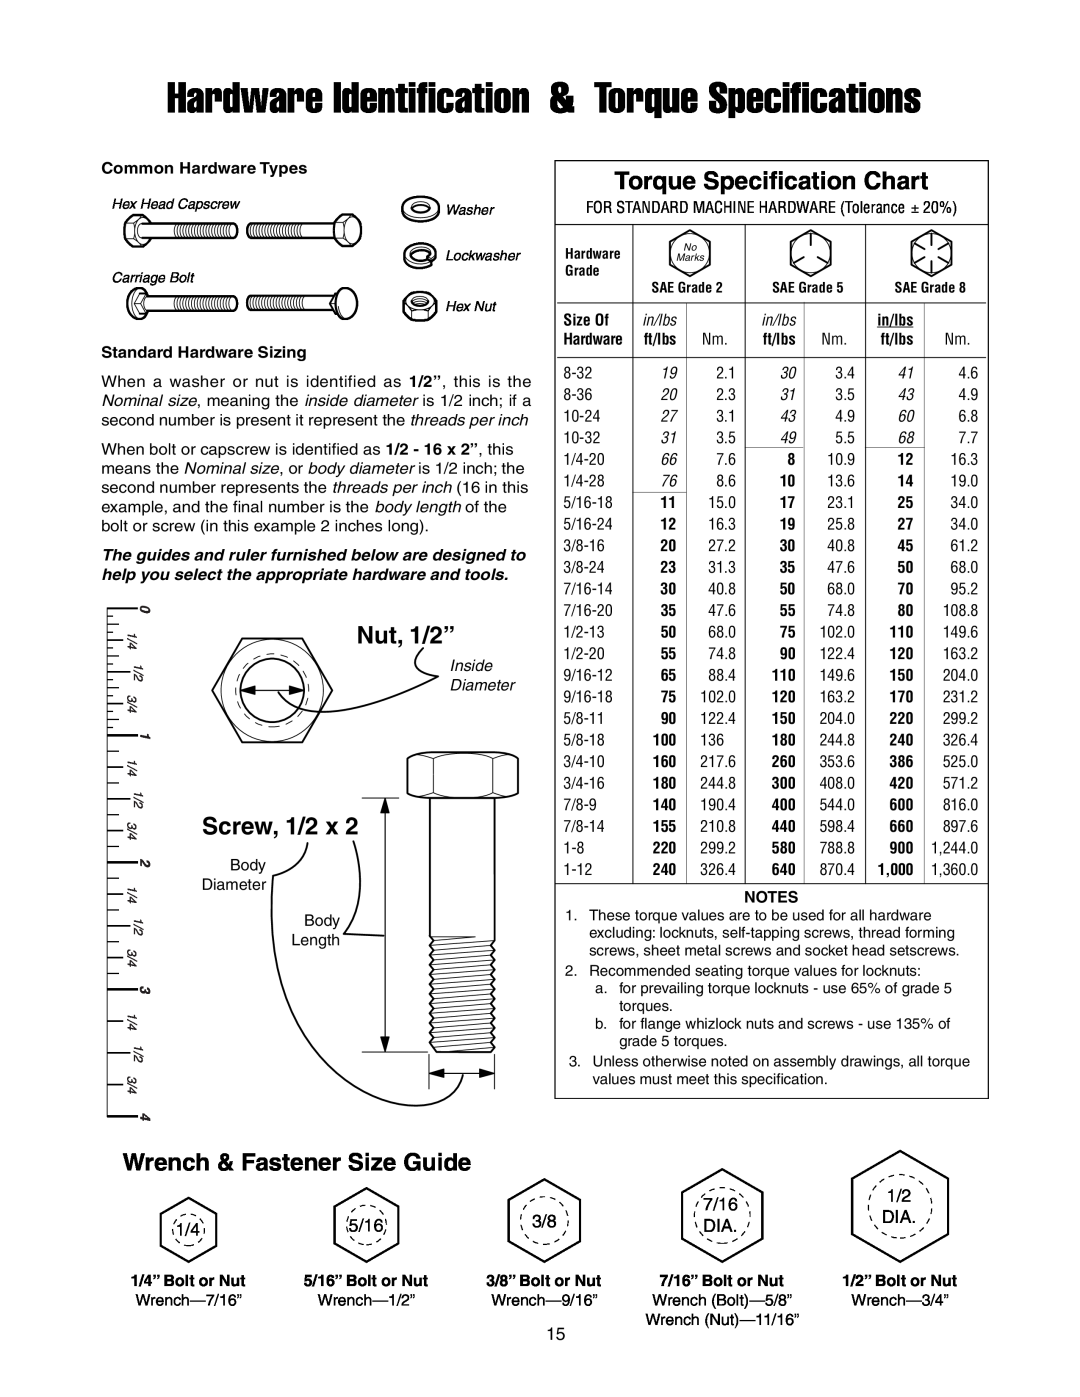 Snapper 1721303-01 Torque Specification Chart, Hardware Identification & Torque Specifications, Nut, 1/2”, Screw, 1/2 x 